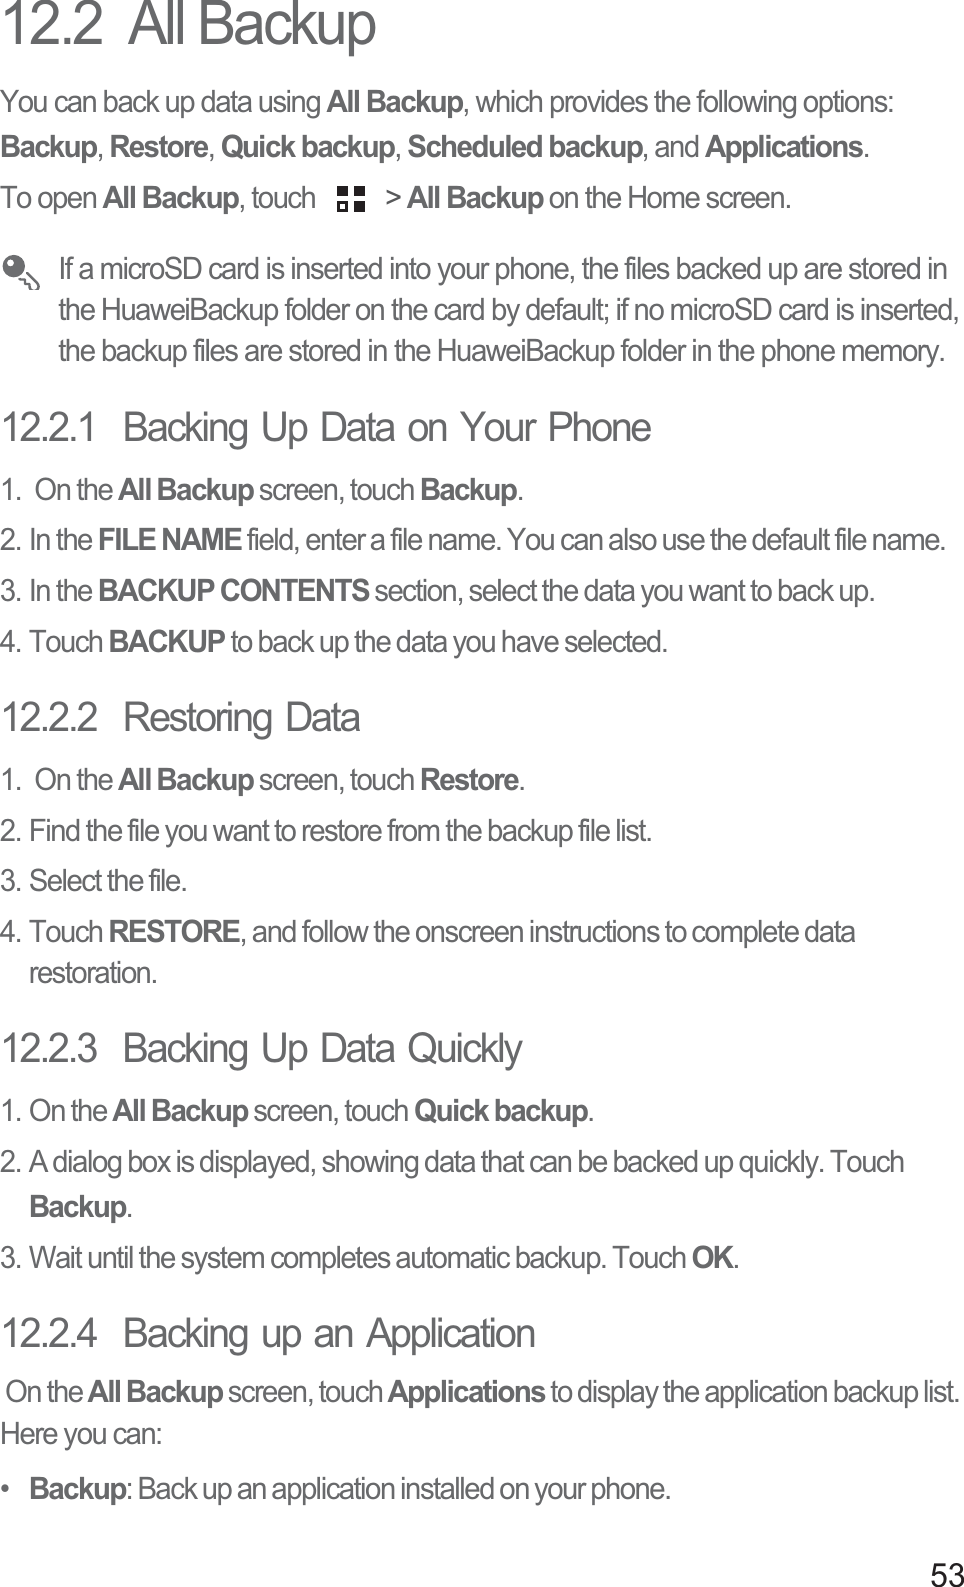 5312.2  All BackupYou can back up data using All Backup, which provides the following options: Backup, Restore, Quick backup, Scheduled backup, and Applications.To open All Backup, touch   &gt; All Backup on the Home screen.  If a microSD card is inserted into your phone, the files backed up are stored in the HuaweiBackup folder on the card by default; if no microSD card is inserted, the backup files are stored in the HuaweiBackup folder in the phone memory.12.2.1  Backing Up Data on Your Phone1.  On the All Backup screen, touch Backup. 2. In the FILE NAME field, enter a file name. You can also use the default file name.3. In the BACKUP CONTENTS section, select the data you want to back up. 4. Touch BACKUP to back up the data you have selected.12.2.2  Restoring Data1.  On the All Backup screen, touch Restore. 2. Find the file you want to restore from the backup file list. 3. Select the file.4. Touch RESTORE, and follow the onscreen instructions to complete data restoration. 12.2.3  Backing Up Data Quickly1. On the All Backup screen, touch Quick backup. 2. A dialog box is displayed, showing data that can be backed up quickly. Touch Backup. 3. Wait until the system completes automatic backup. Touch OK. 12.2.4  Backing up an Application On the All Backup screen, touch Applications to display the application backup list. Here you can: •  Backup: Back up an application installed on your phone.